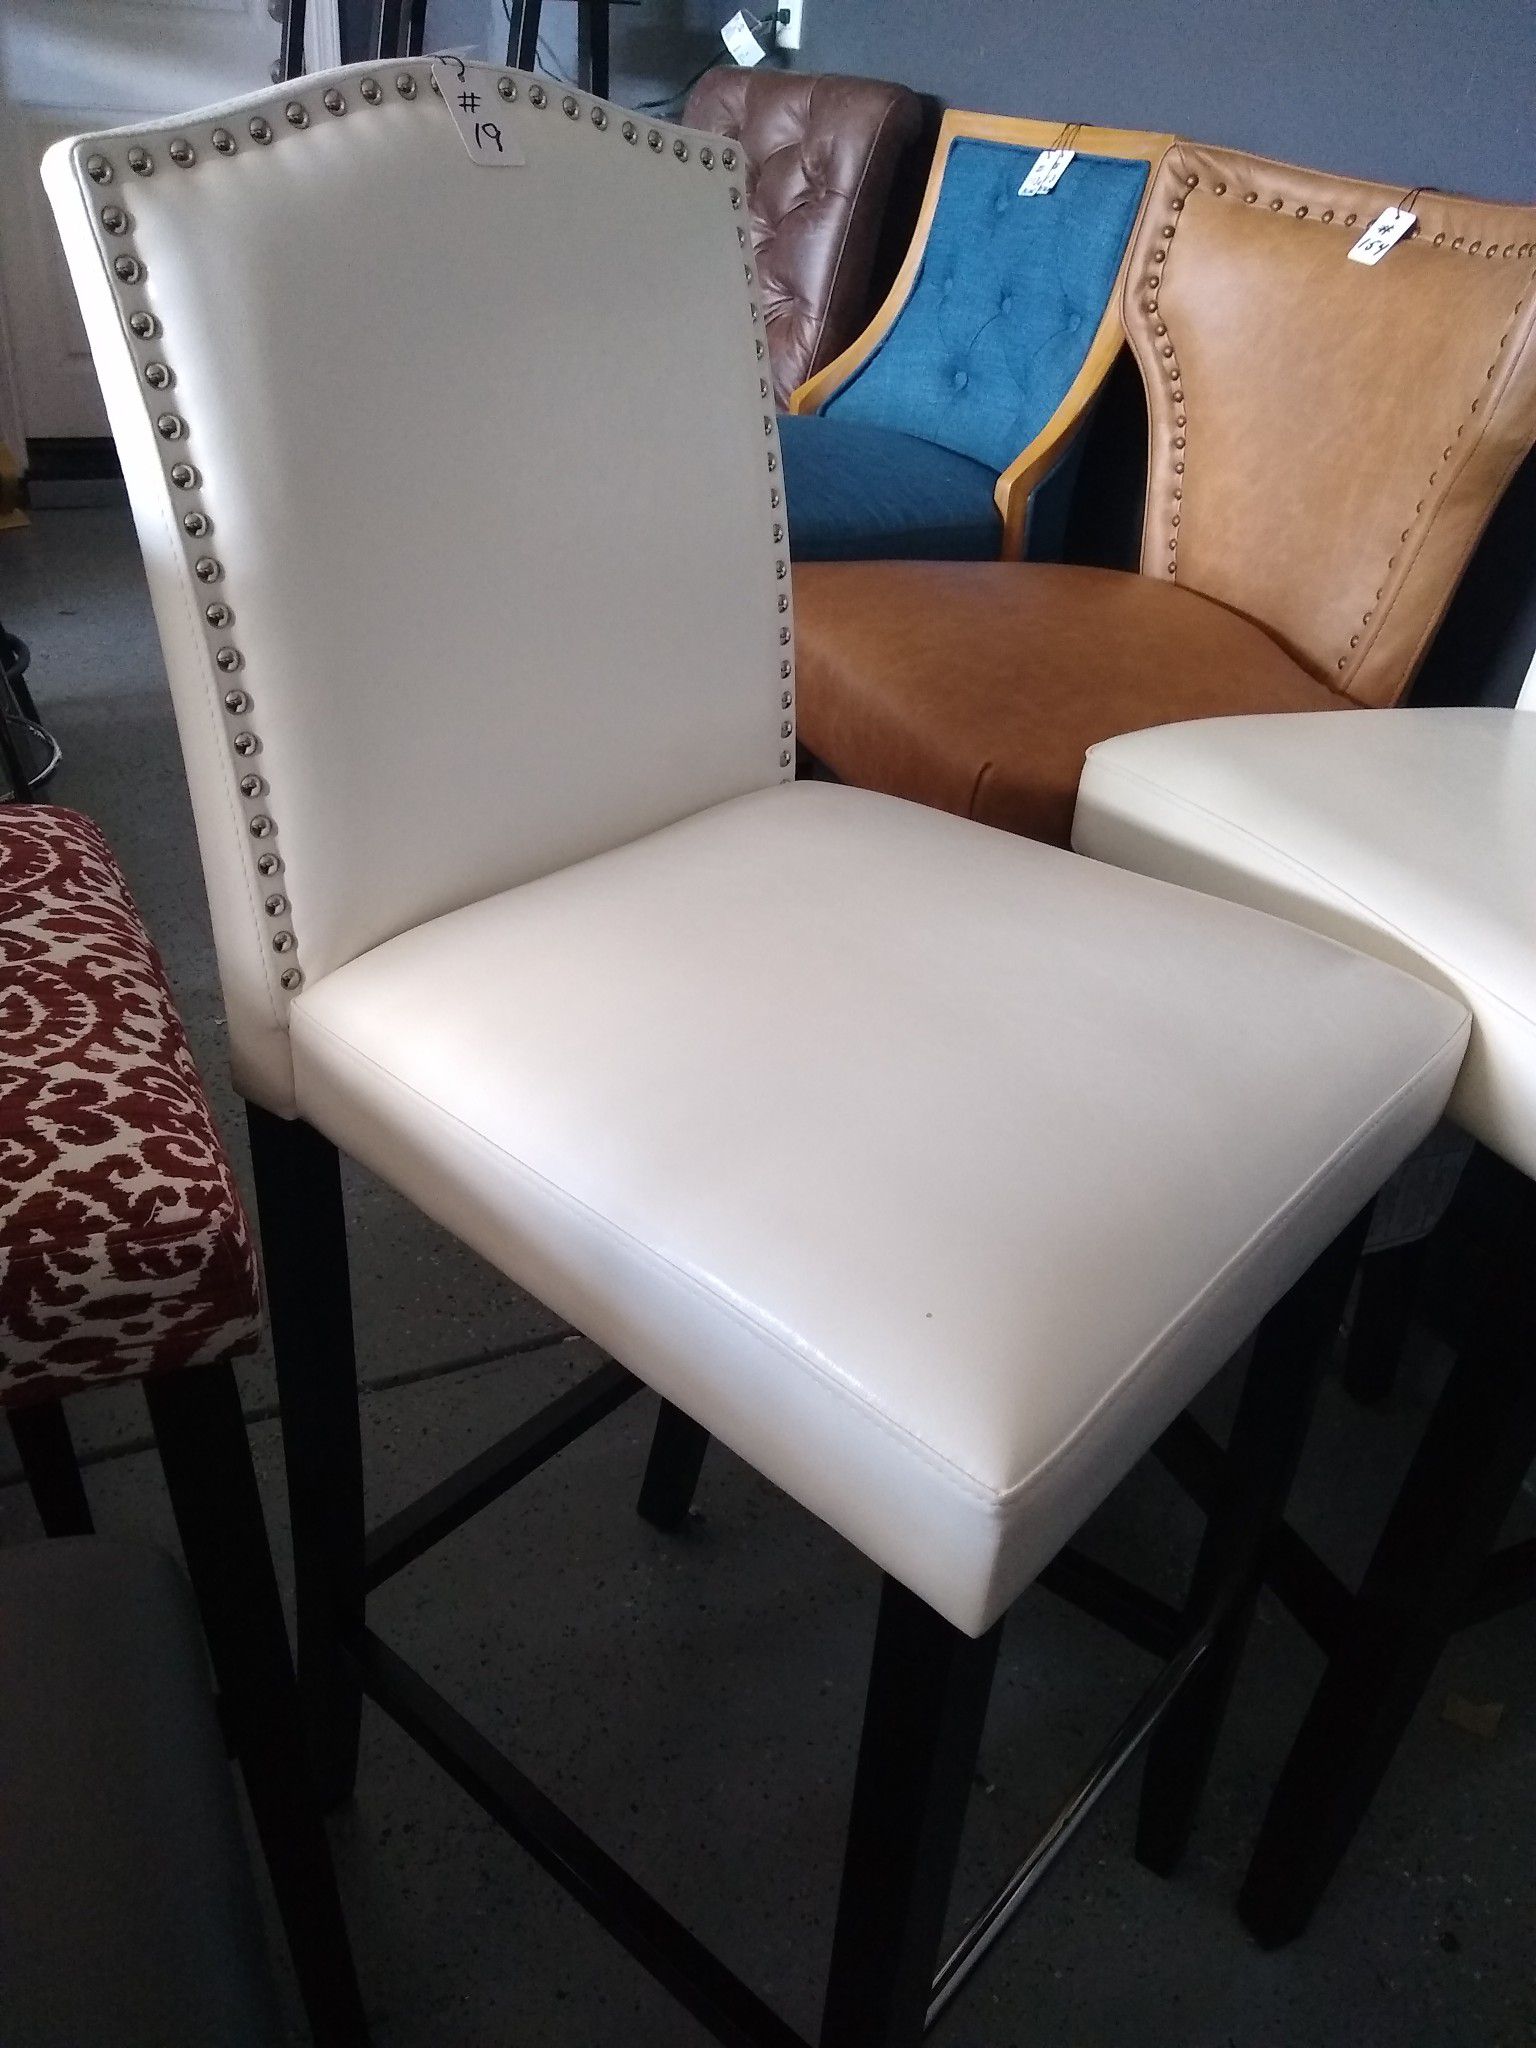 White Nailhead Barstools 30" 6 AVAILABLE $89 each! NEW in box